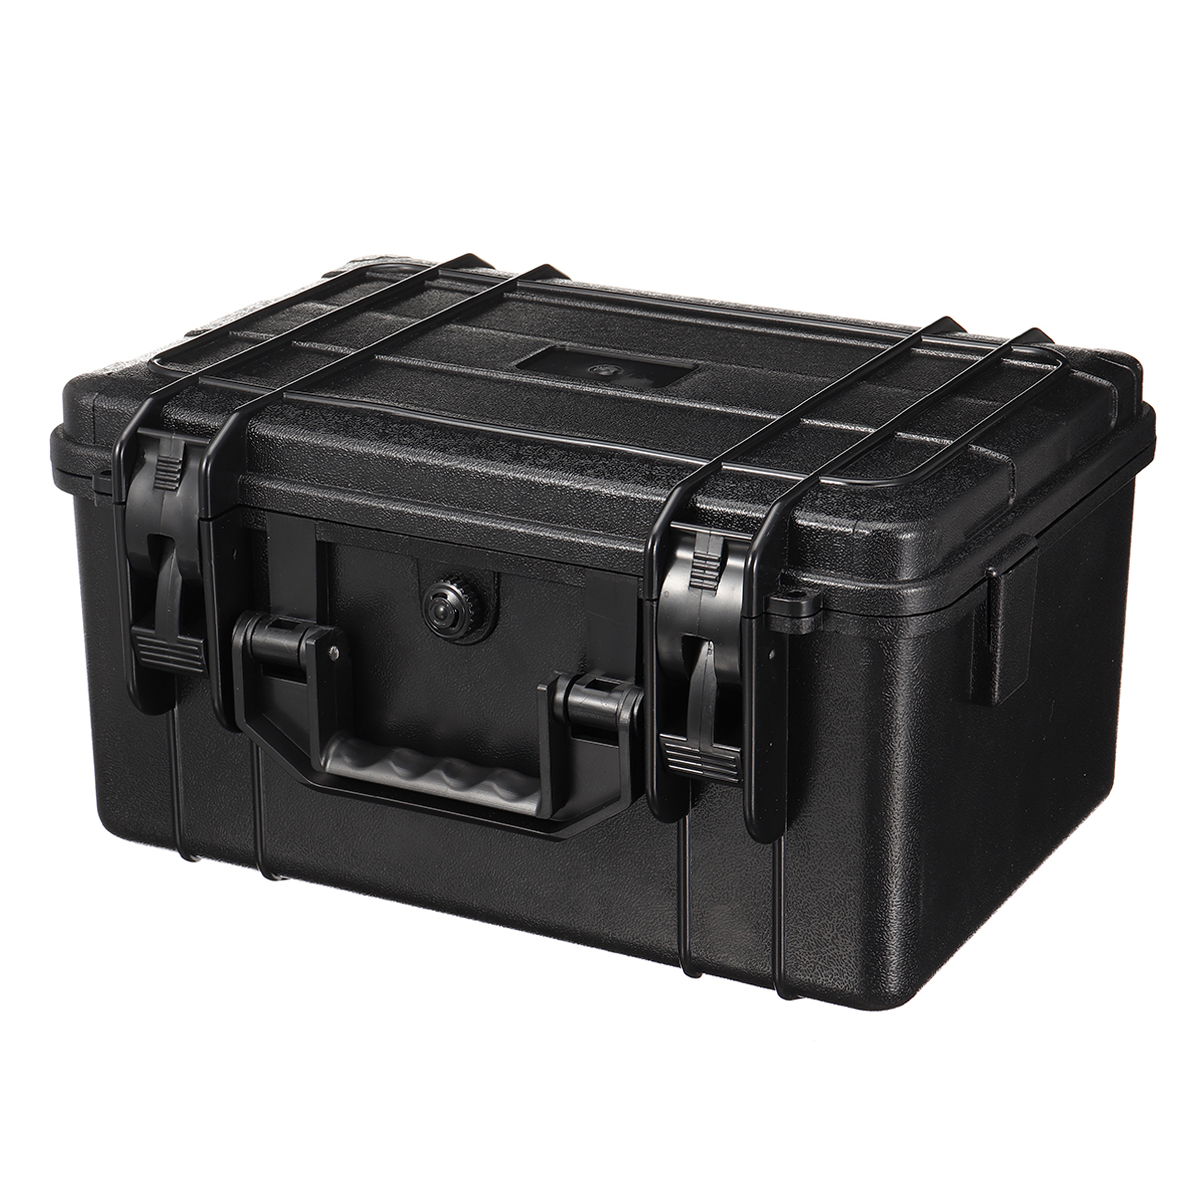 4-Sizes-ABS-Plastic-Sealed-Waterproof-Storage-Case-Foam-Impact--Resistant-Hiking-Portable-Tool-Box-D-1674189-12